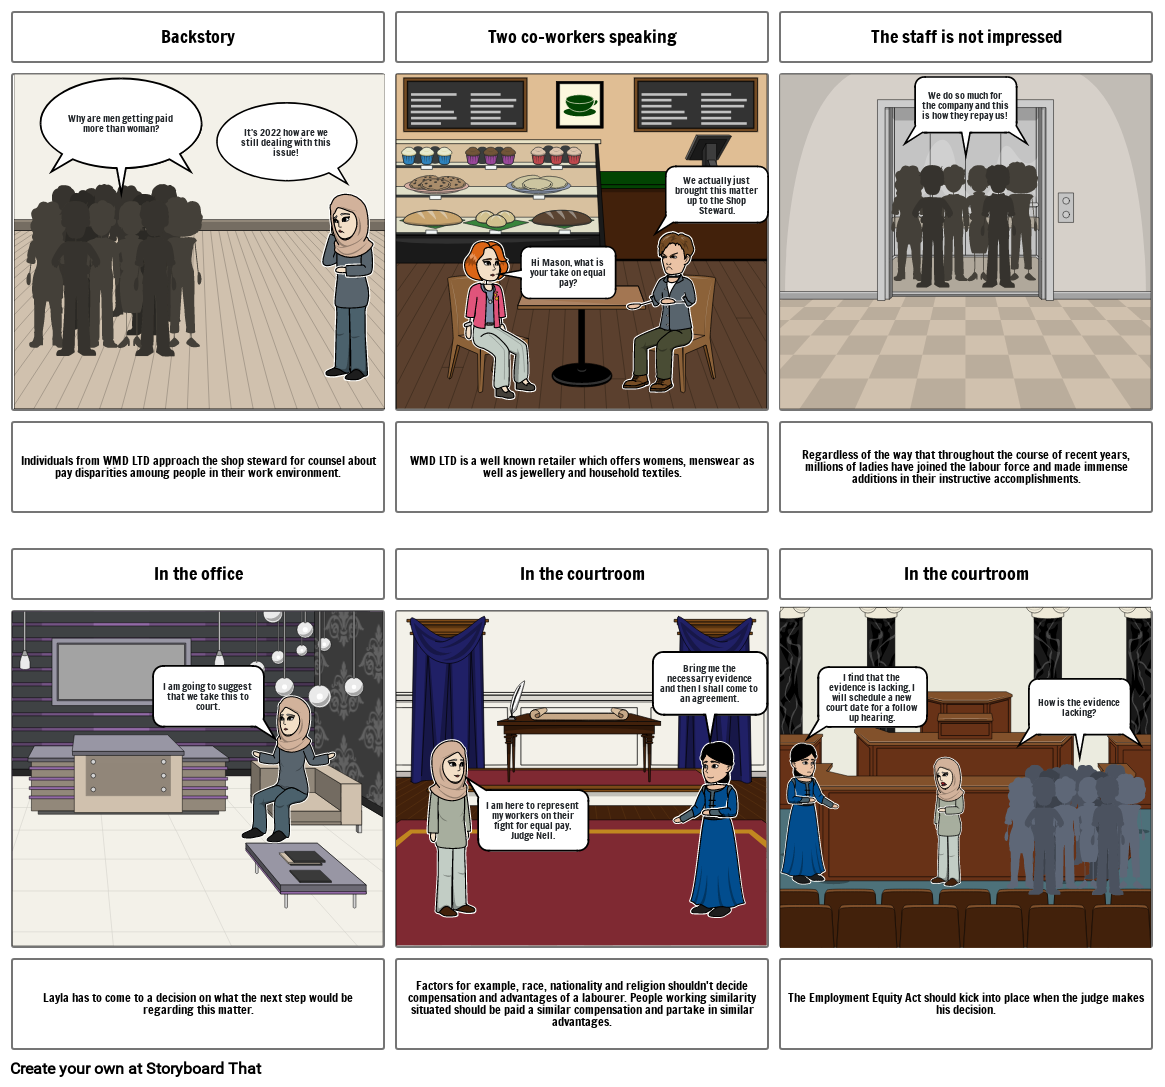 Storyboard 2: The Roles and Rights of the Shop Steward in the Workplace